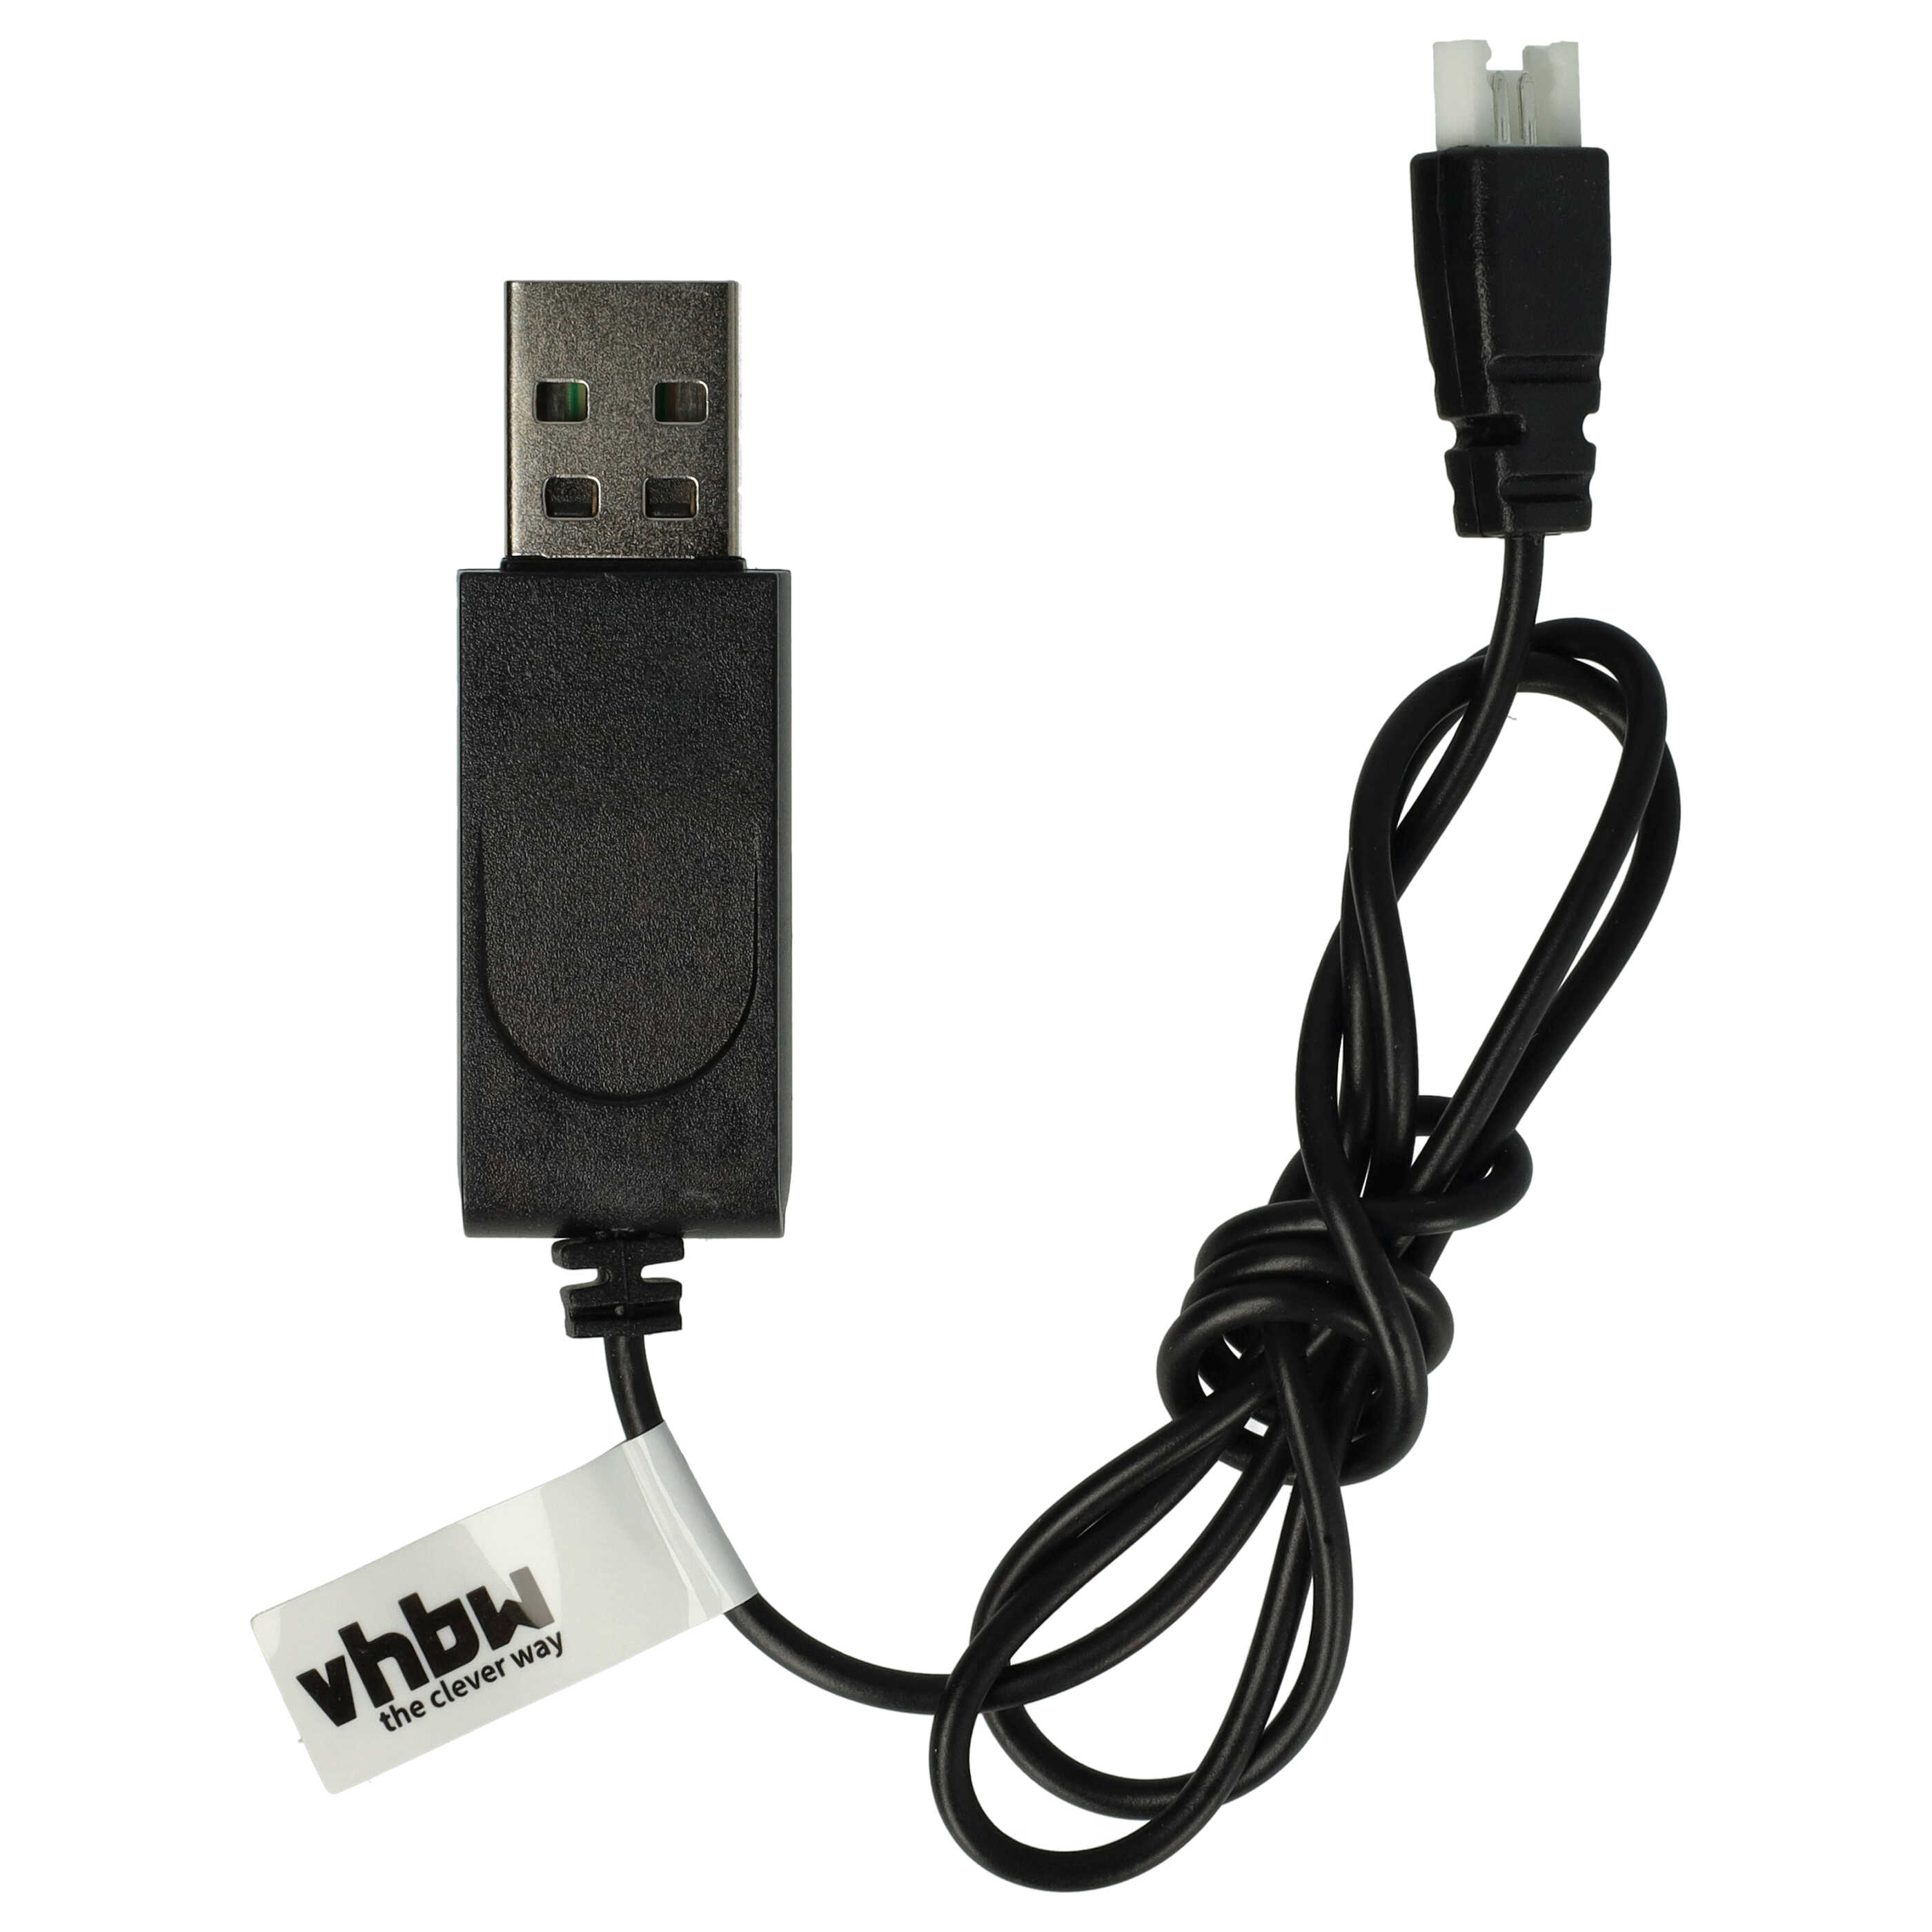 vhbw USB Charging Cable for SYMA (S-Idee) F949 Drone, Quadcopter - 60cm